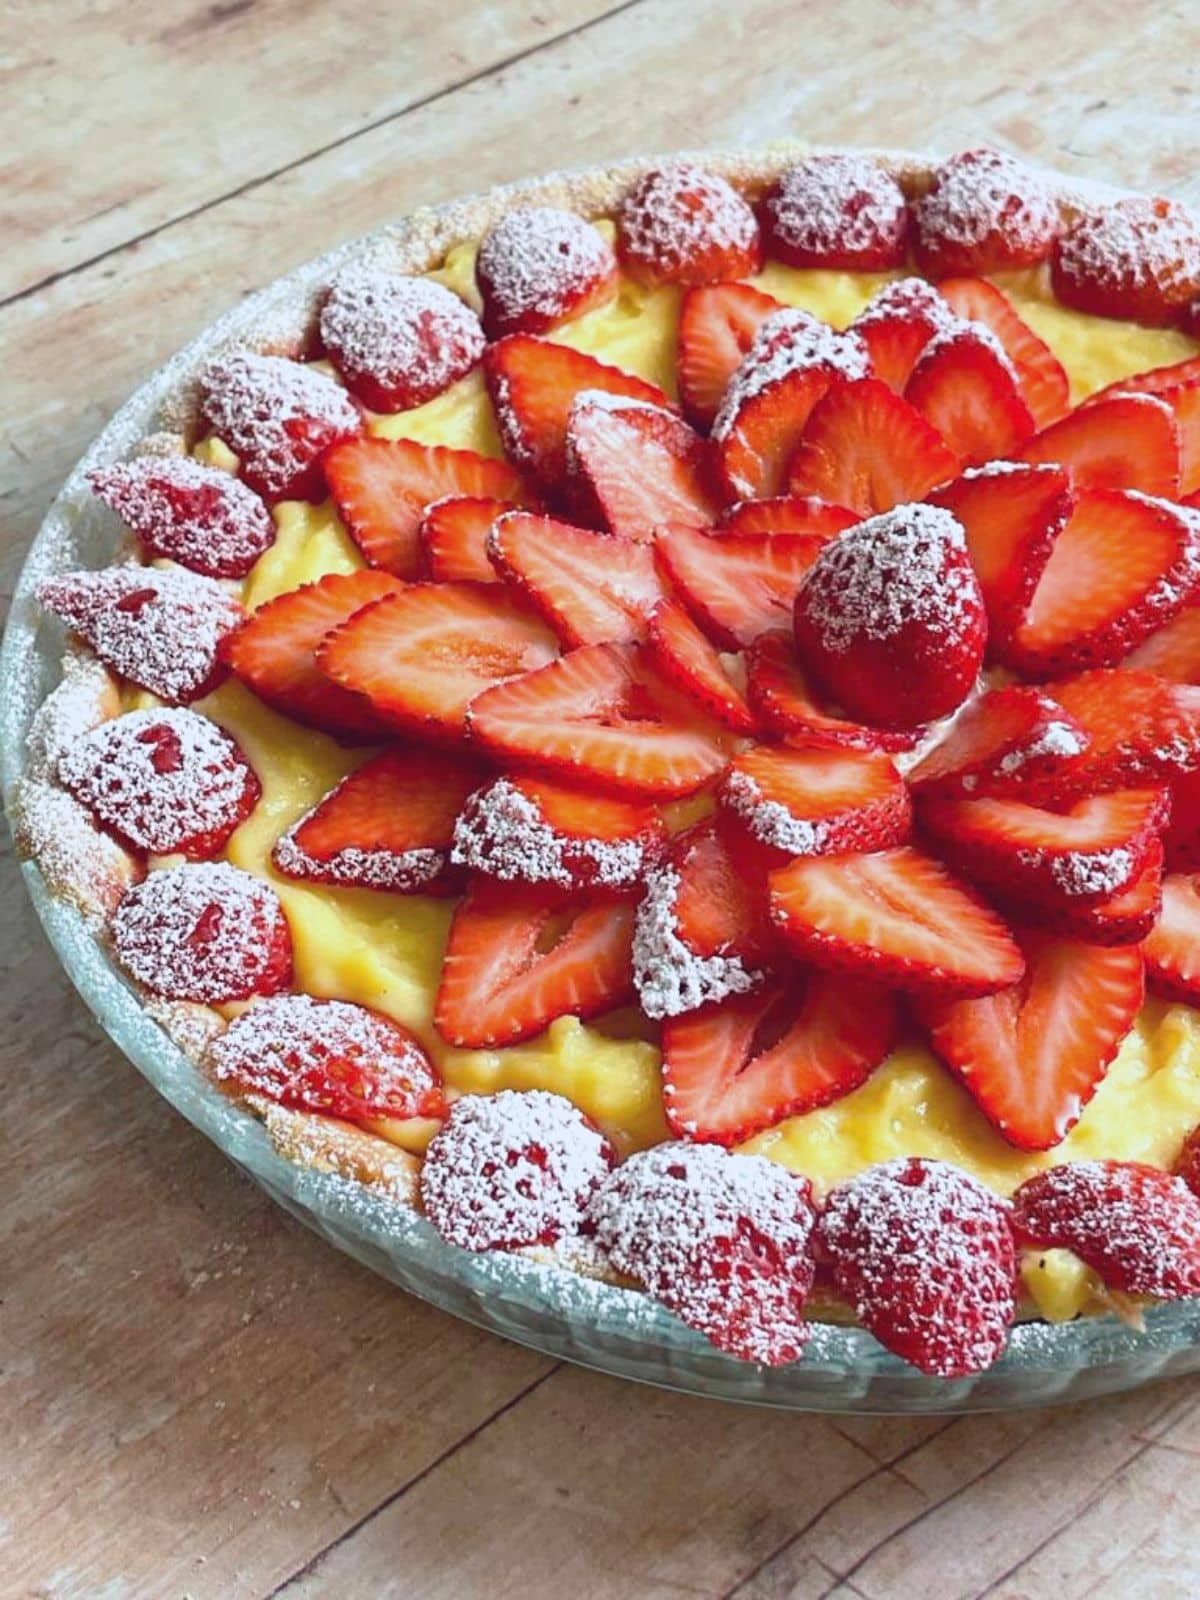 Strawberry tart with custard and a layer of sliced strawberries and powdered sugar.